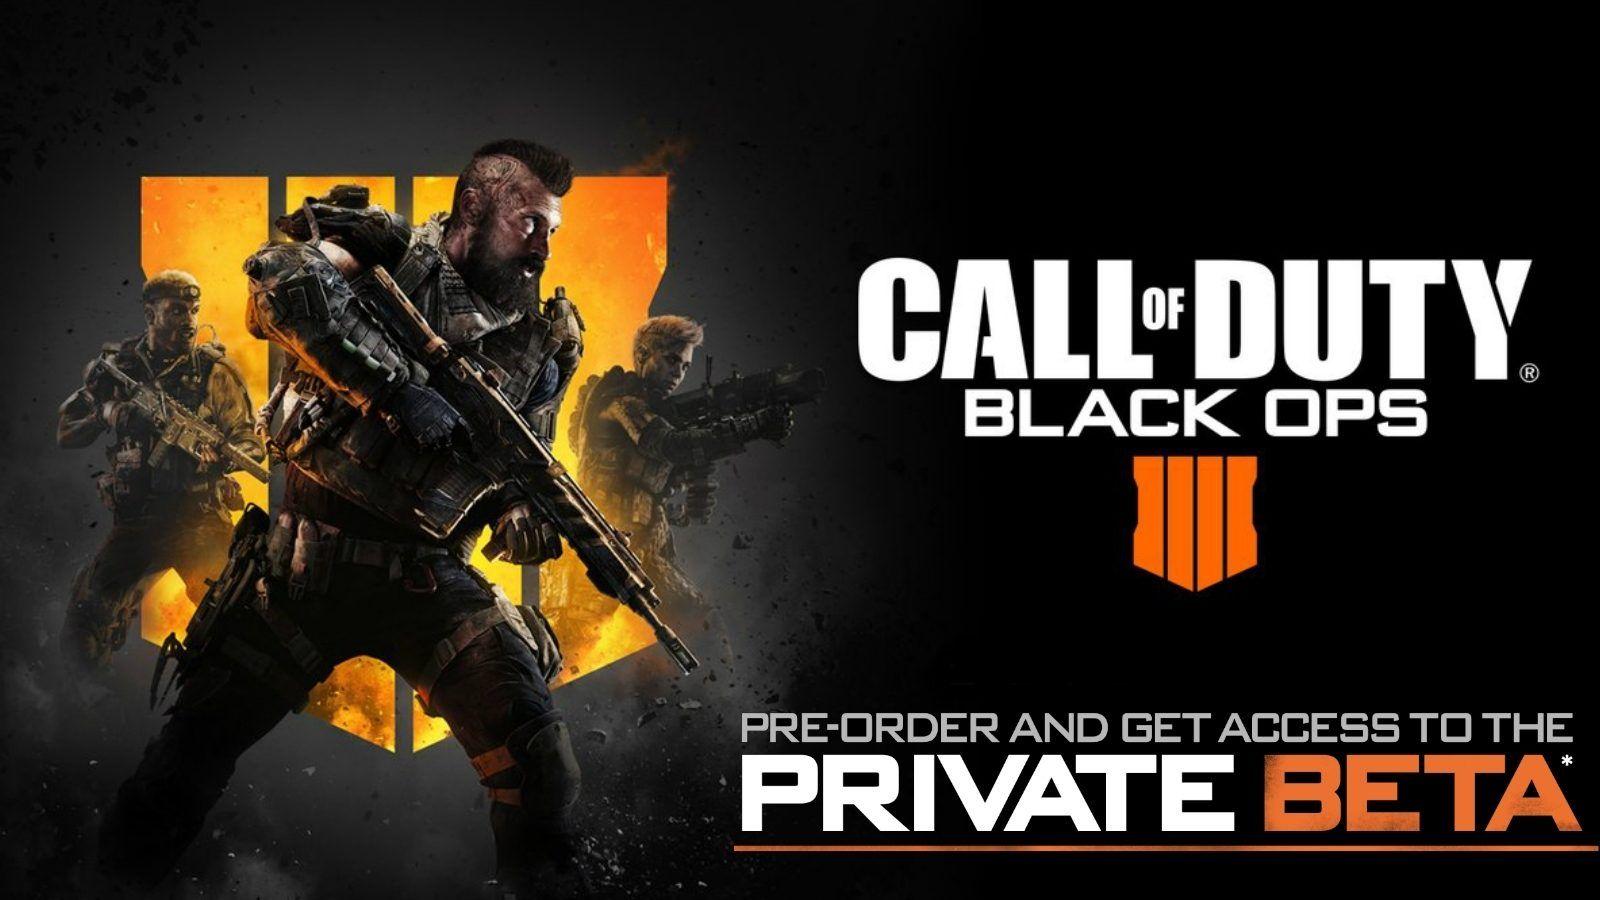 How to Play the Call of Duty Black Ops 4 Multiplayer and Blackout